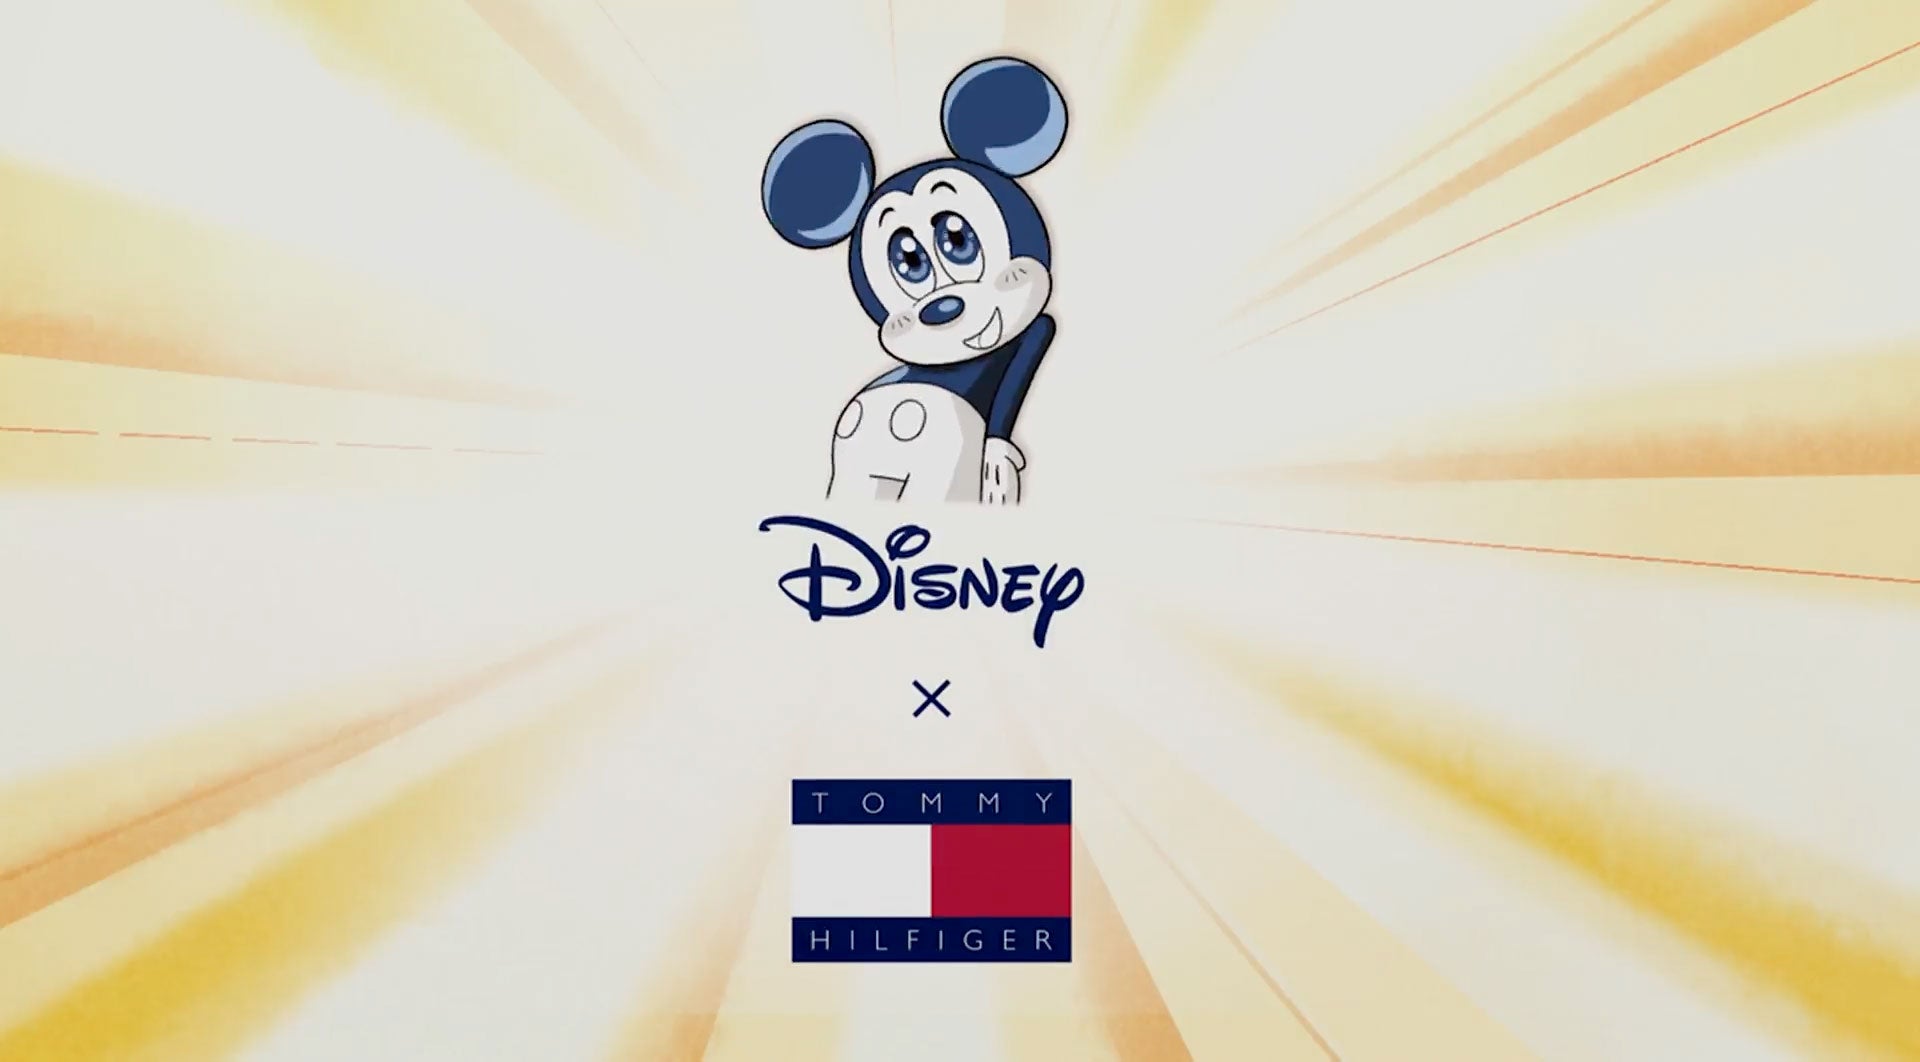 ALERT! You Can Get the Disney x Tommy Hilfiger Collection on SALE Now!